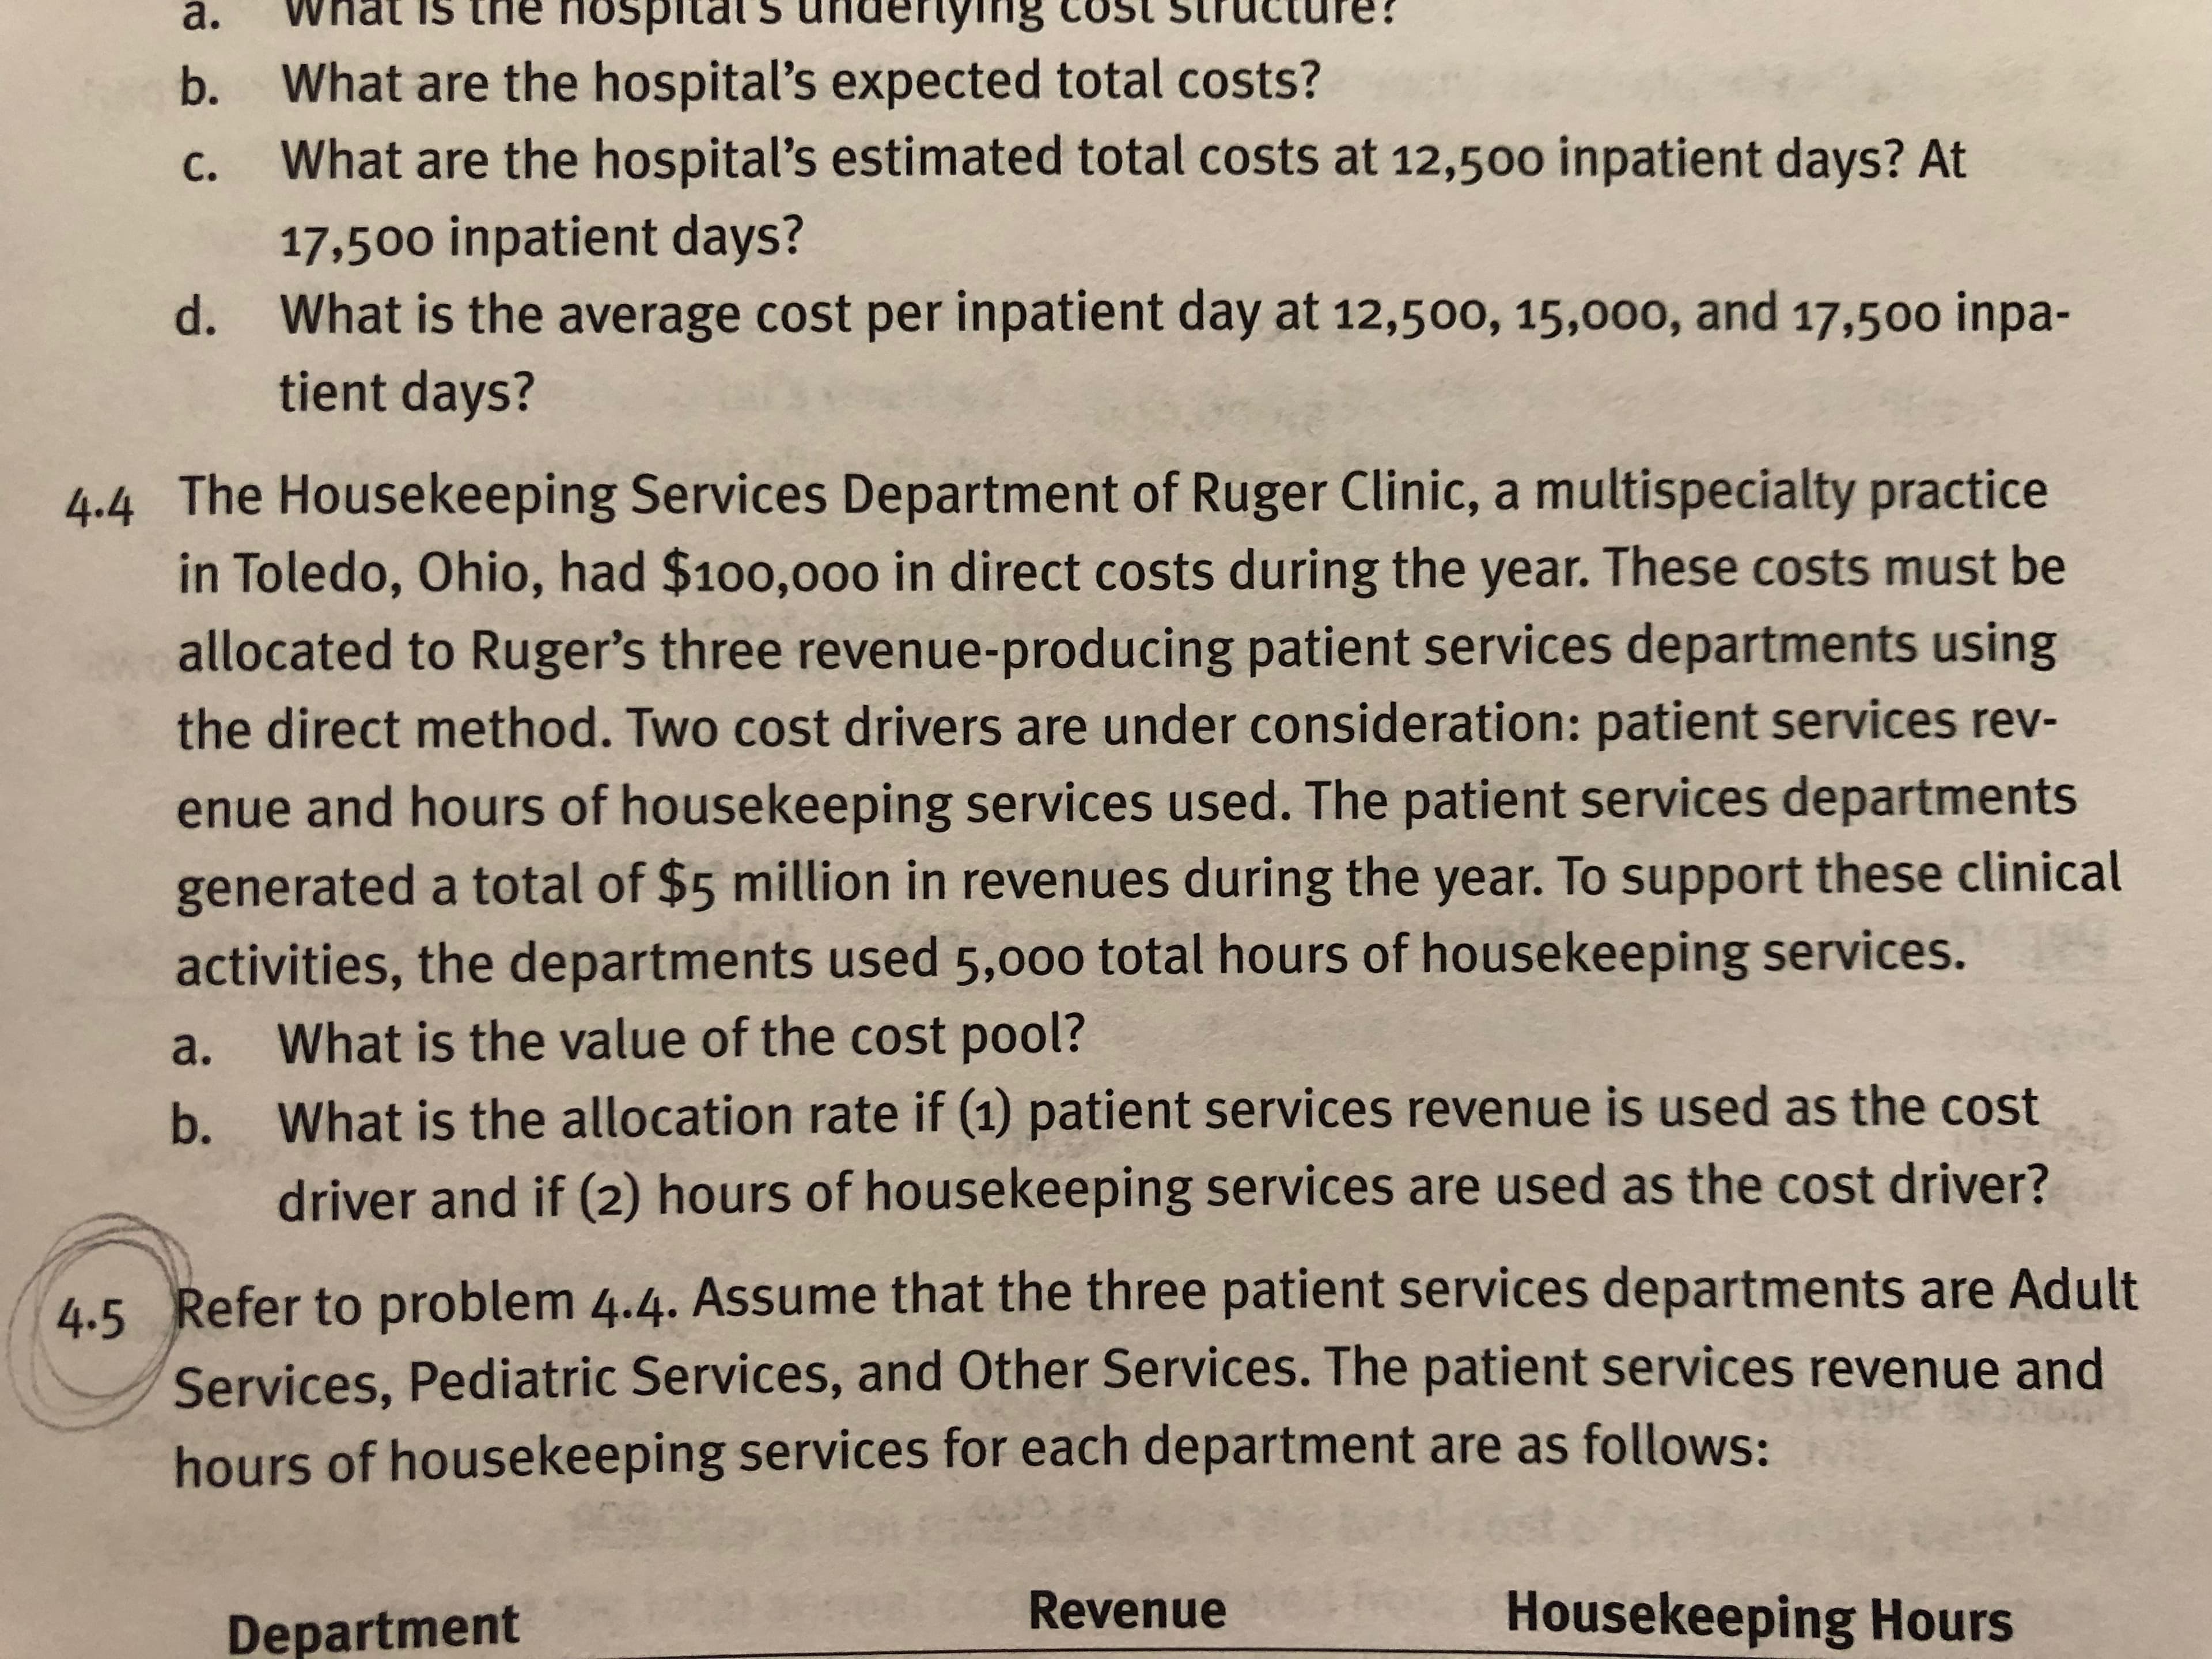 a.
b.
c.
Wnat is the nospitat's undeying Cost Structure!
What are the hospital's expected total costs?
What are the hospital's estimated total costs at 12,50o inpatient days? At
17.500 inpatient days?
What is the average cost per inpatient day at 12,500, 15,000, and 17,500 inpa-
d.
tient days?
4.4 The Housekeeping Services Department of Ruger Clinic, a multispecialty practice
in Toledo, Ohio, had $100,000 in direct costs during the year. These costs must be
allocated to Ruger's three revenue-producing patient services departments using
the direct method. Two cost drivers are under consideration: patient services rev-
enue and hours of housekeeping services used. The patient services departments
generated a total of $5 million in revenues during the year. To support these clinical
activities, the departments used 5,ooo total hours of housekeeping services.
a. What is the value of the cost pool?
b. What is the allocation rate if (1) patient services revenue is used as the cost
driver and if (2) hours of housekeeping services are used as the cost driver?
4.5 Refer to problem 4.4. Assume that the three patient services departments are Adult
Services, Pediatric Services, and Other Services. The patient services revenue and
hours of housekeeping services for each department are as follows:
Housekeeping Hours
Revenue
Department
